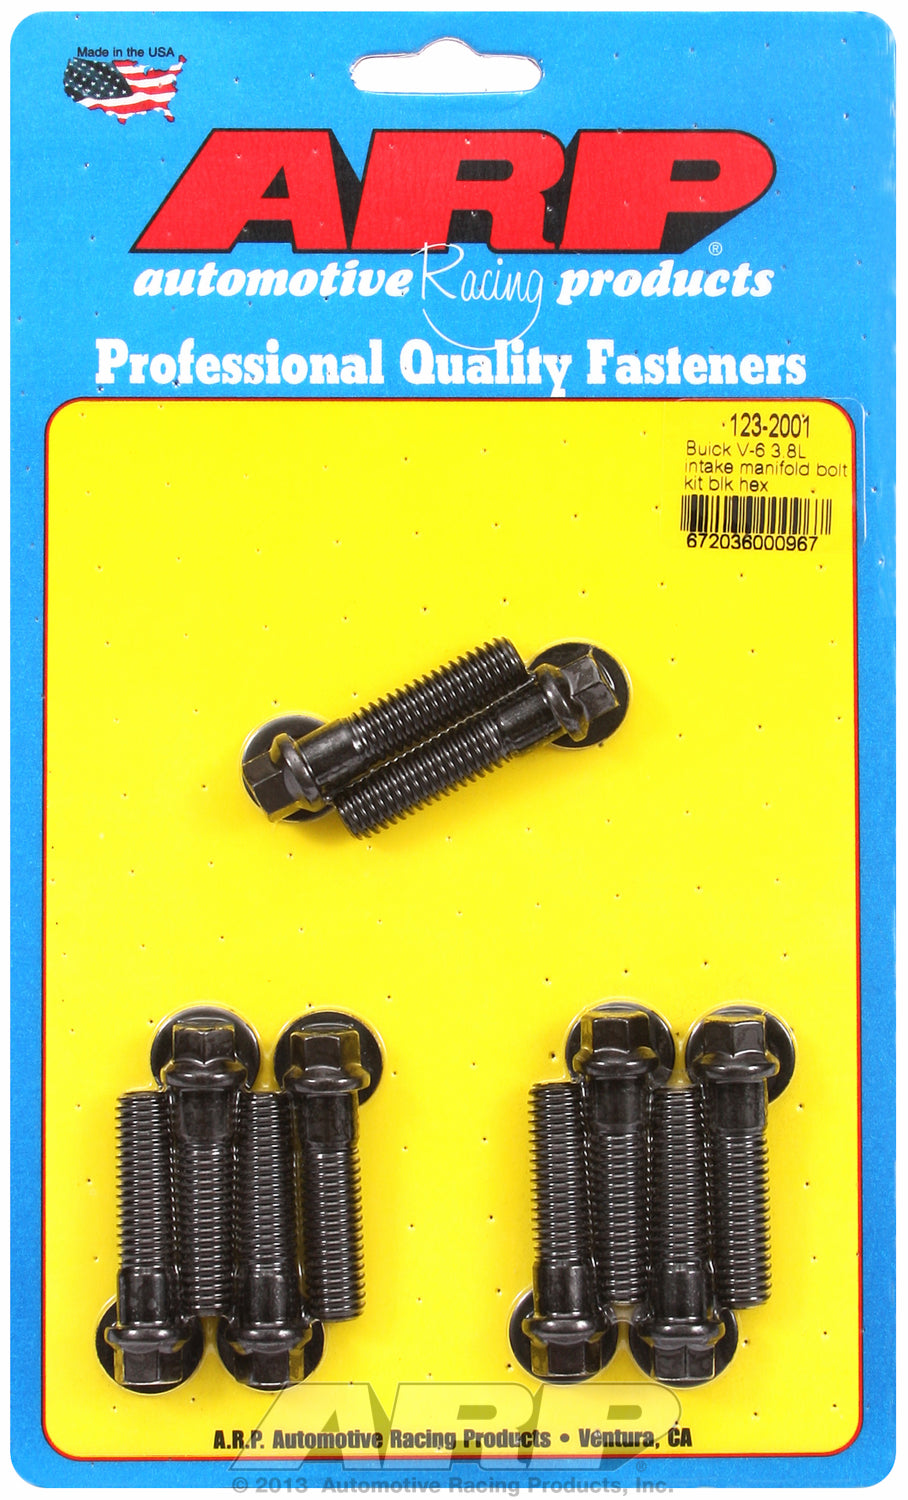 Hex Head Black Oxide Intake Manifold Bolts for Buick 3.8L V6